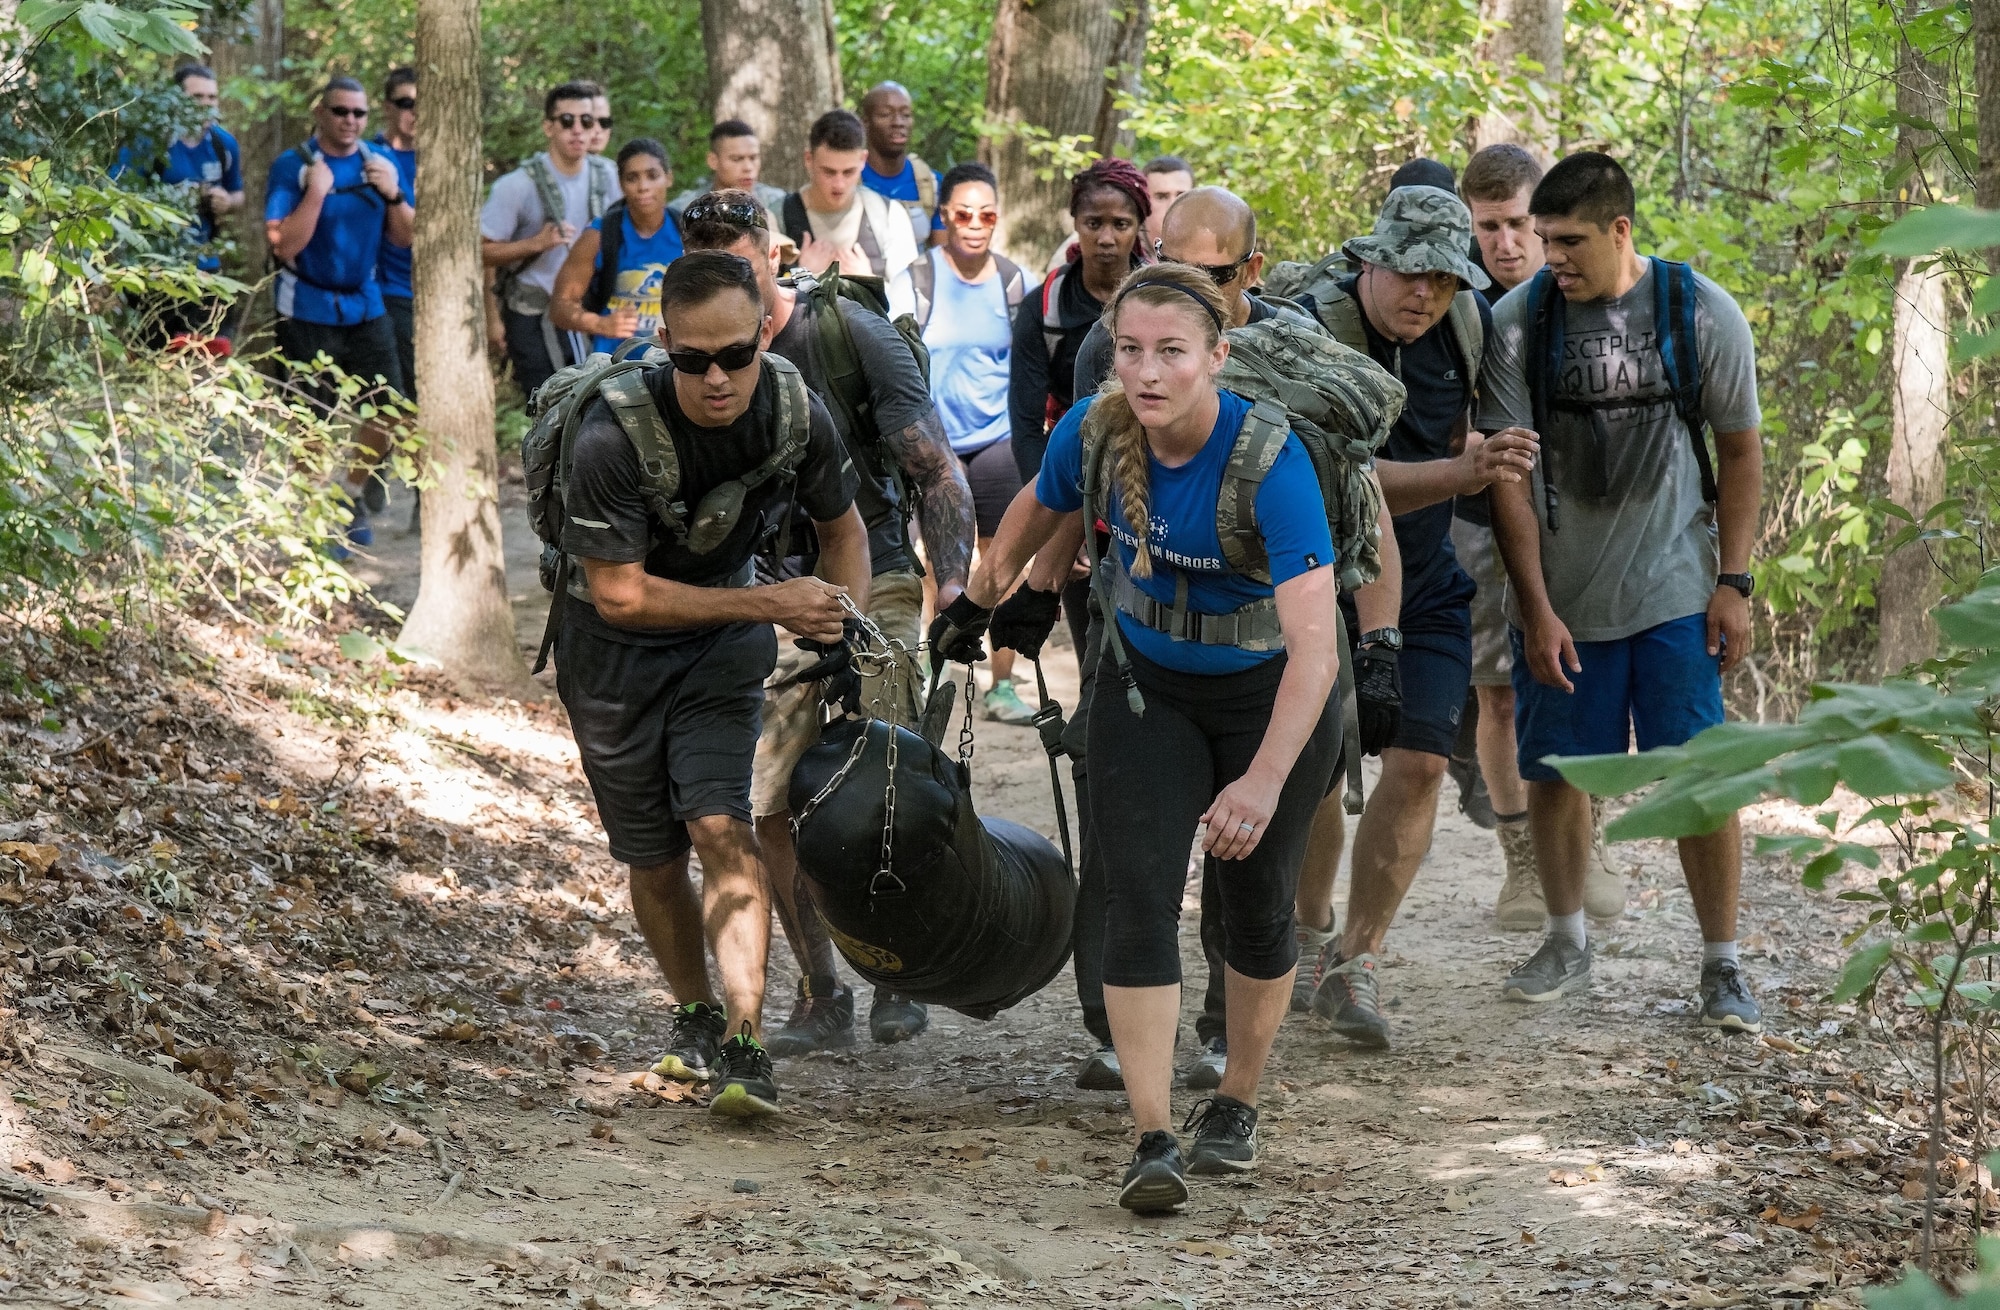 Working in teams, participants in the 2017 GORUCK Light Challenge carried a punching bag while completing three laps on the hiking trail Oct. 6, 2017, at Brecknock Park in Camden, Del. Participants completed the laps while carrying their rucksack, chains and a punching bag. (U.S. Air Force photo by Roland Balik)